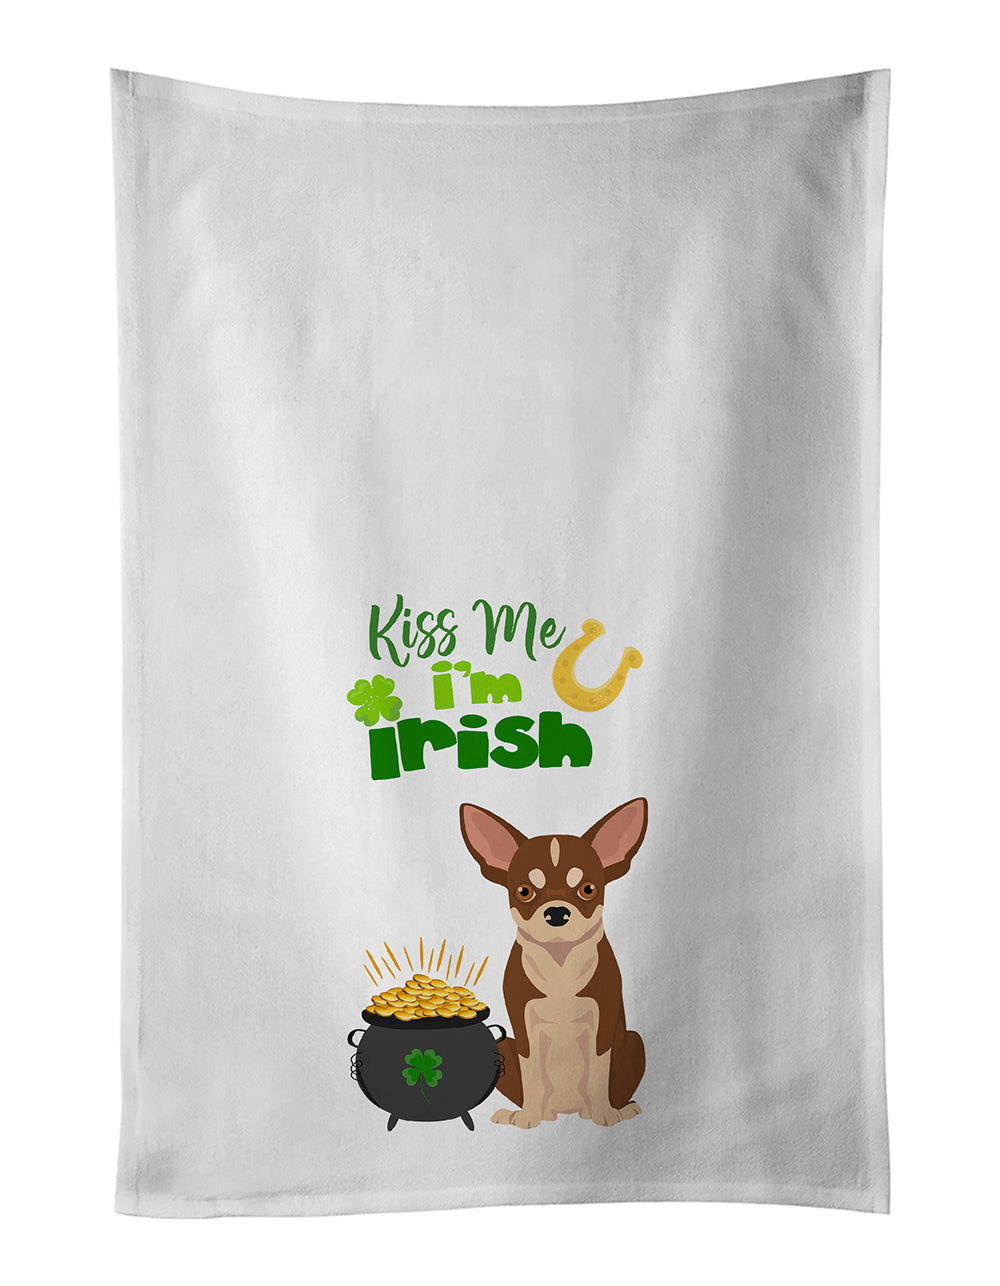 Buy this Red and White Chihuahua St. Patrick's Day White Kitchen Towel Set of 2 Dish Towels